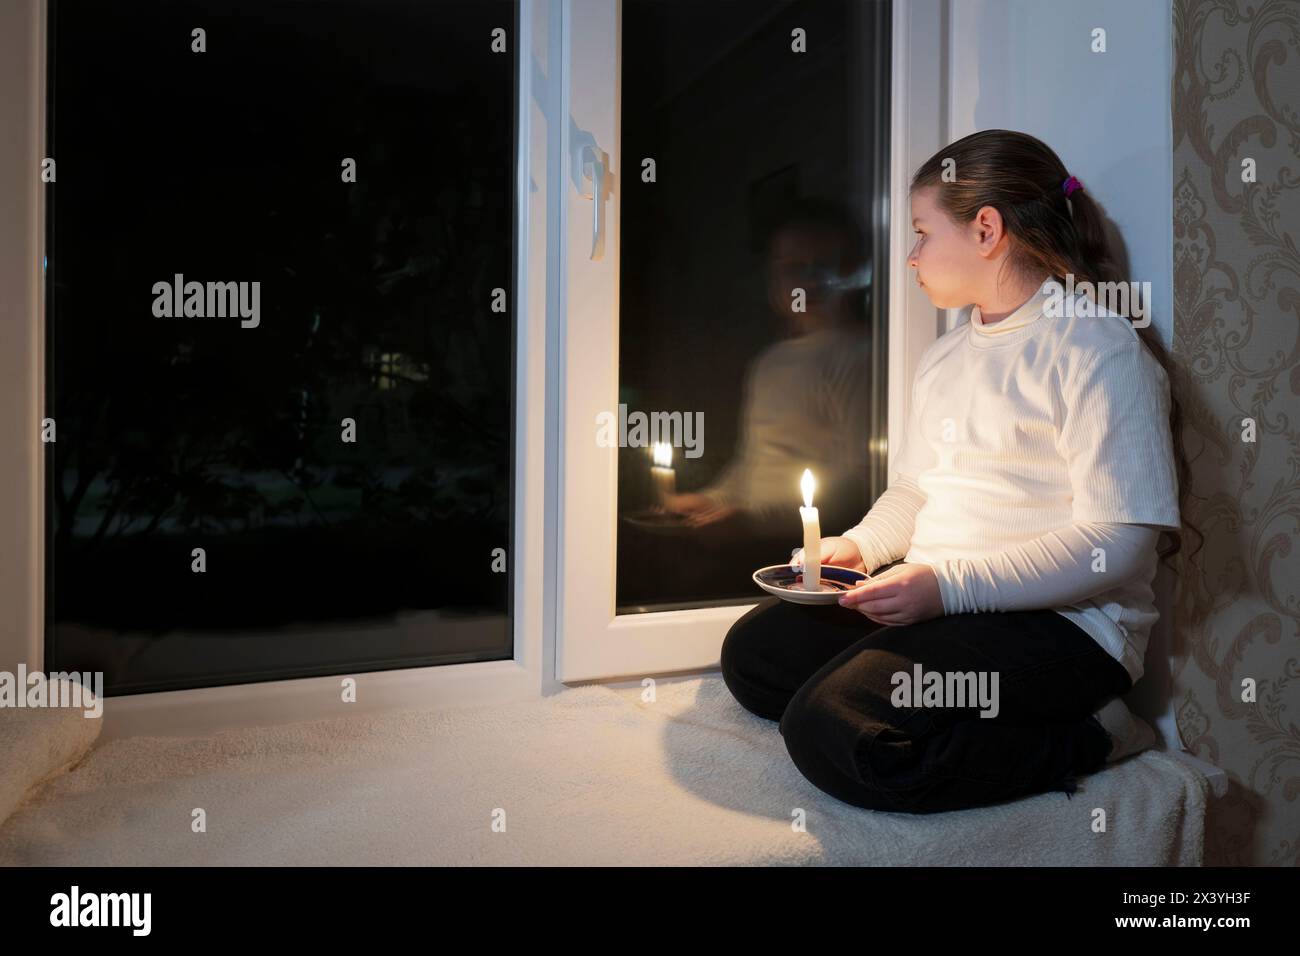 Blackout. Power outage. Girl in a dark room sits on windowsill near window and holds a burning candle in her hands Stock Photo